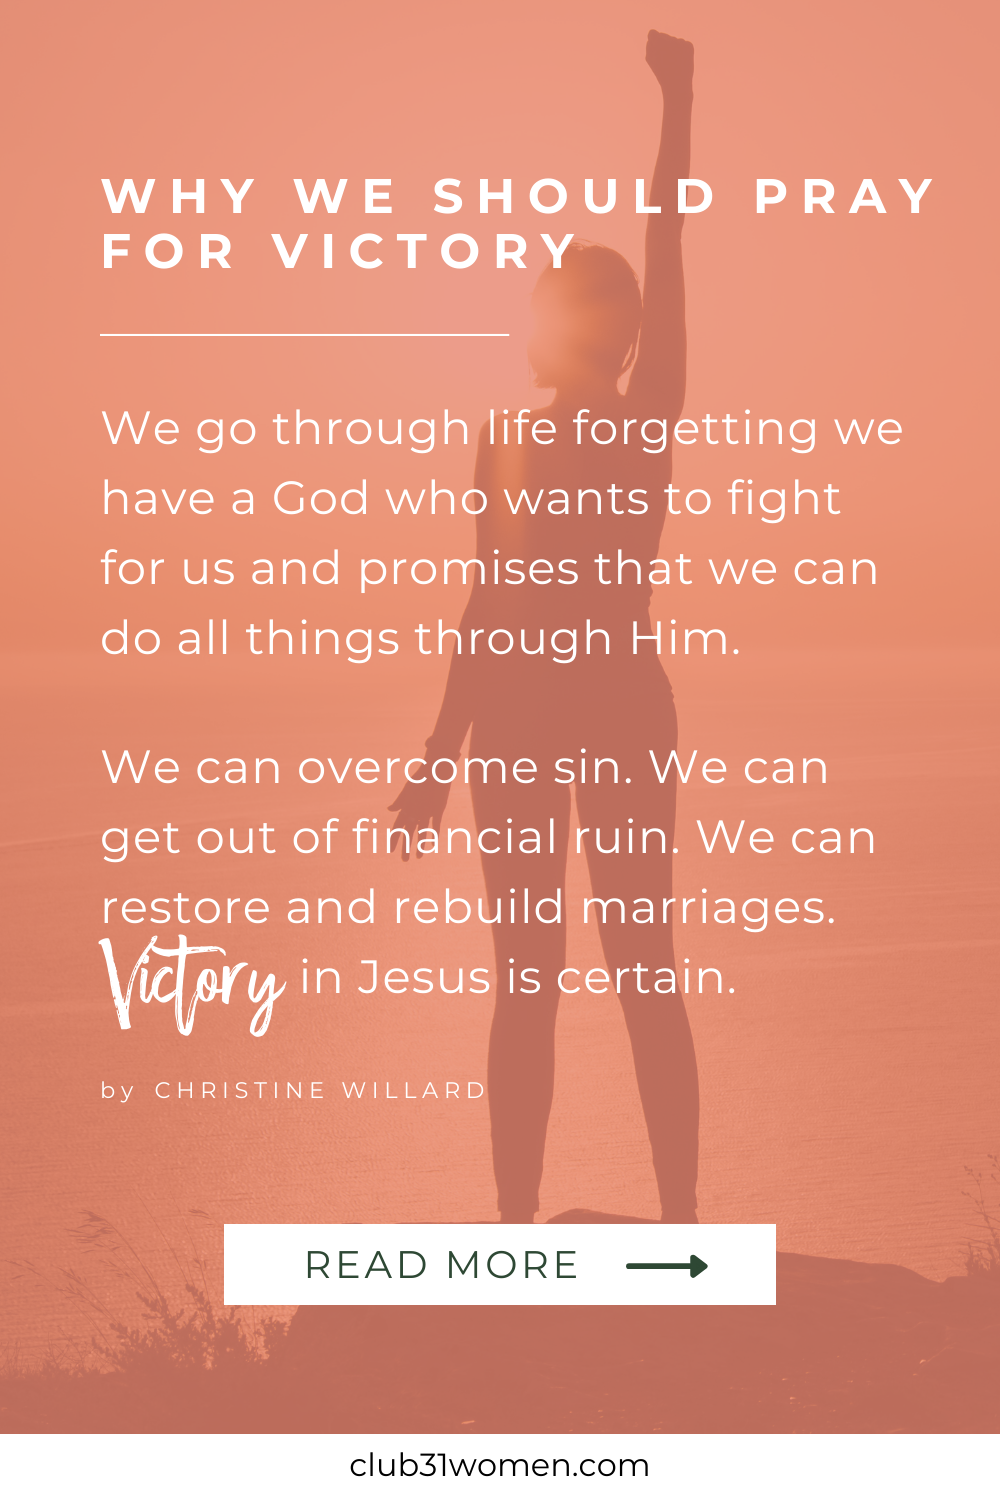 Pray for victory, witnessing God's goodness as He lifts you from life's burdens, seeking triumph over challenges in various aspects of life. via @Club31Women